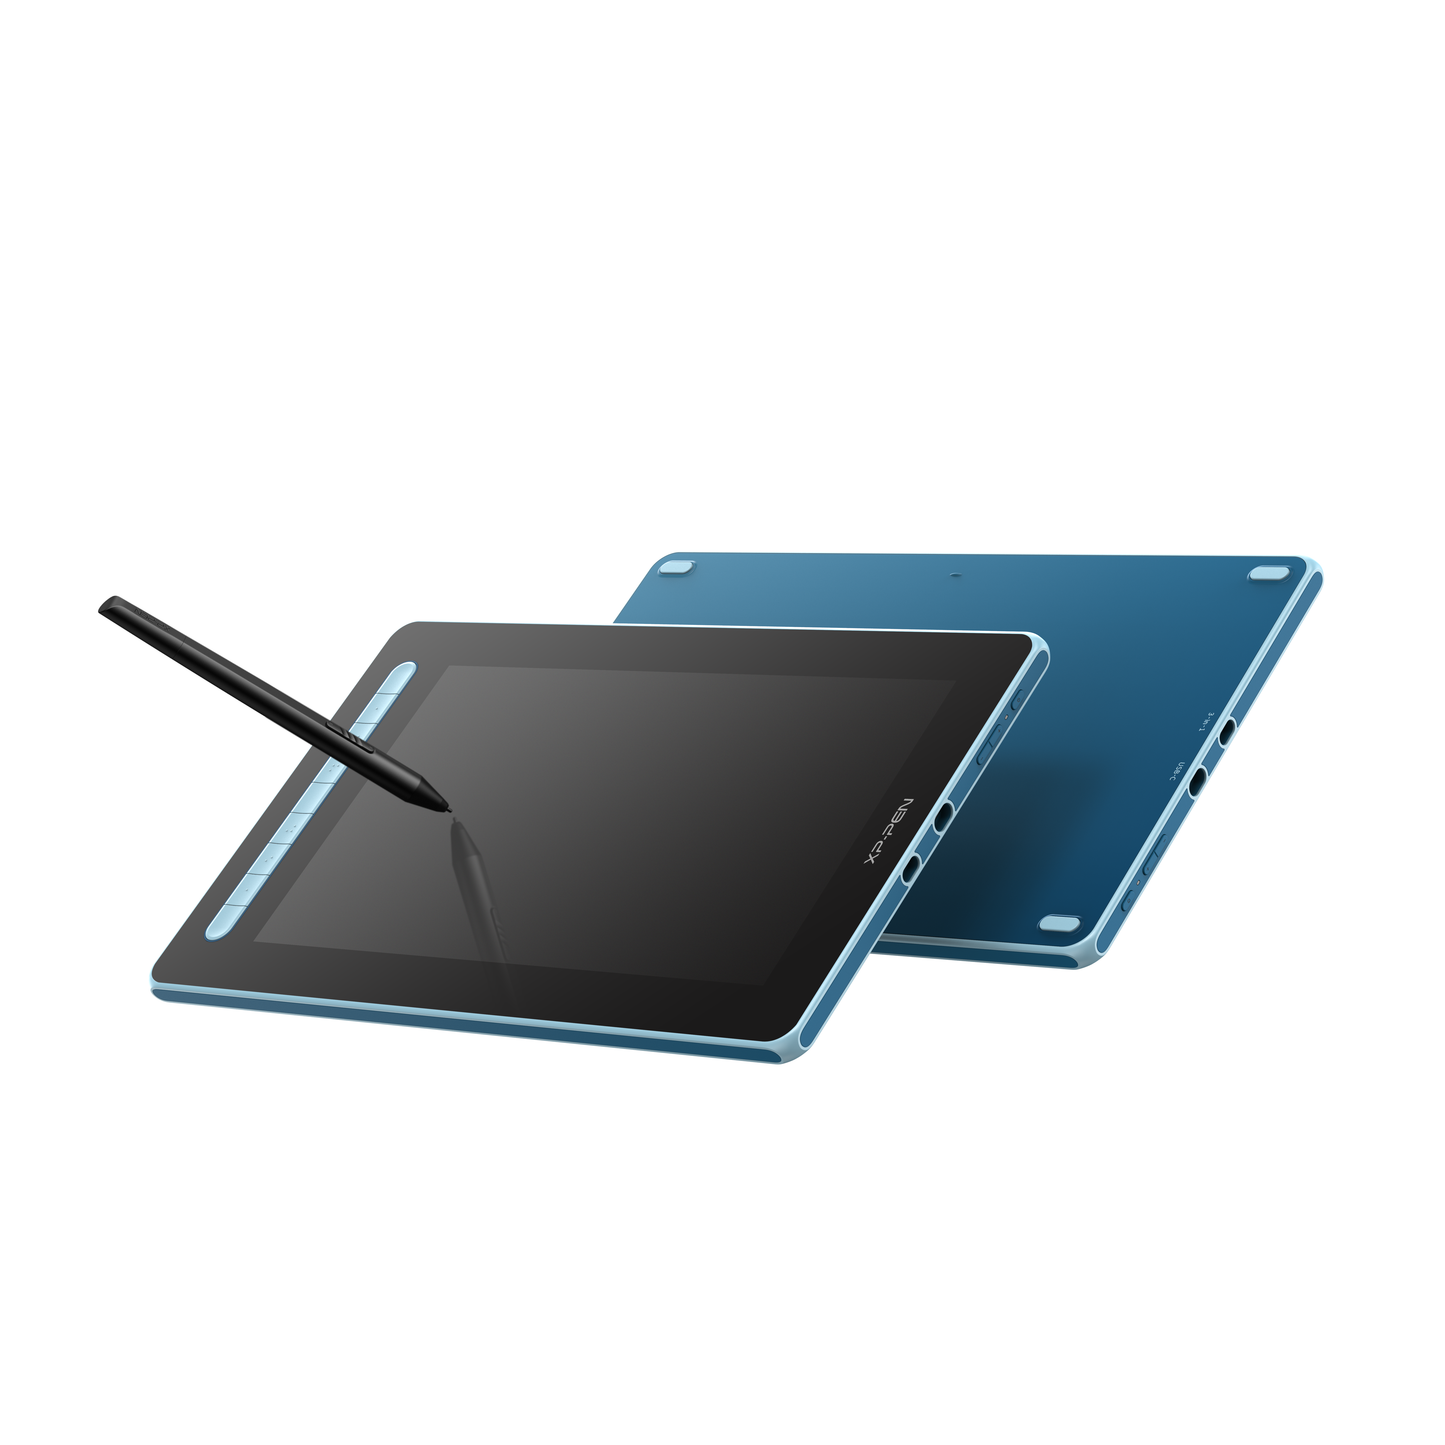 XPPen Artist 13 (2nd Gen) Drawing Display Graphics Tablet